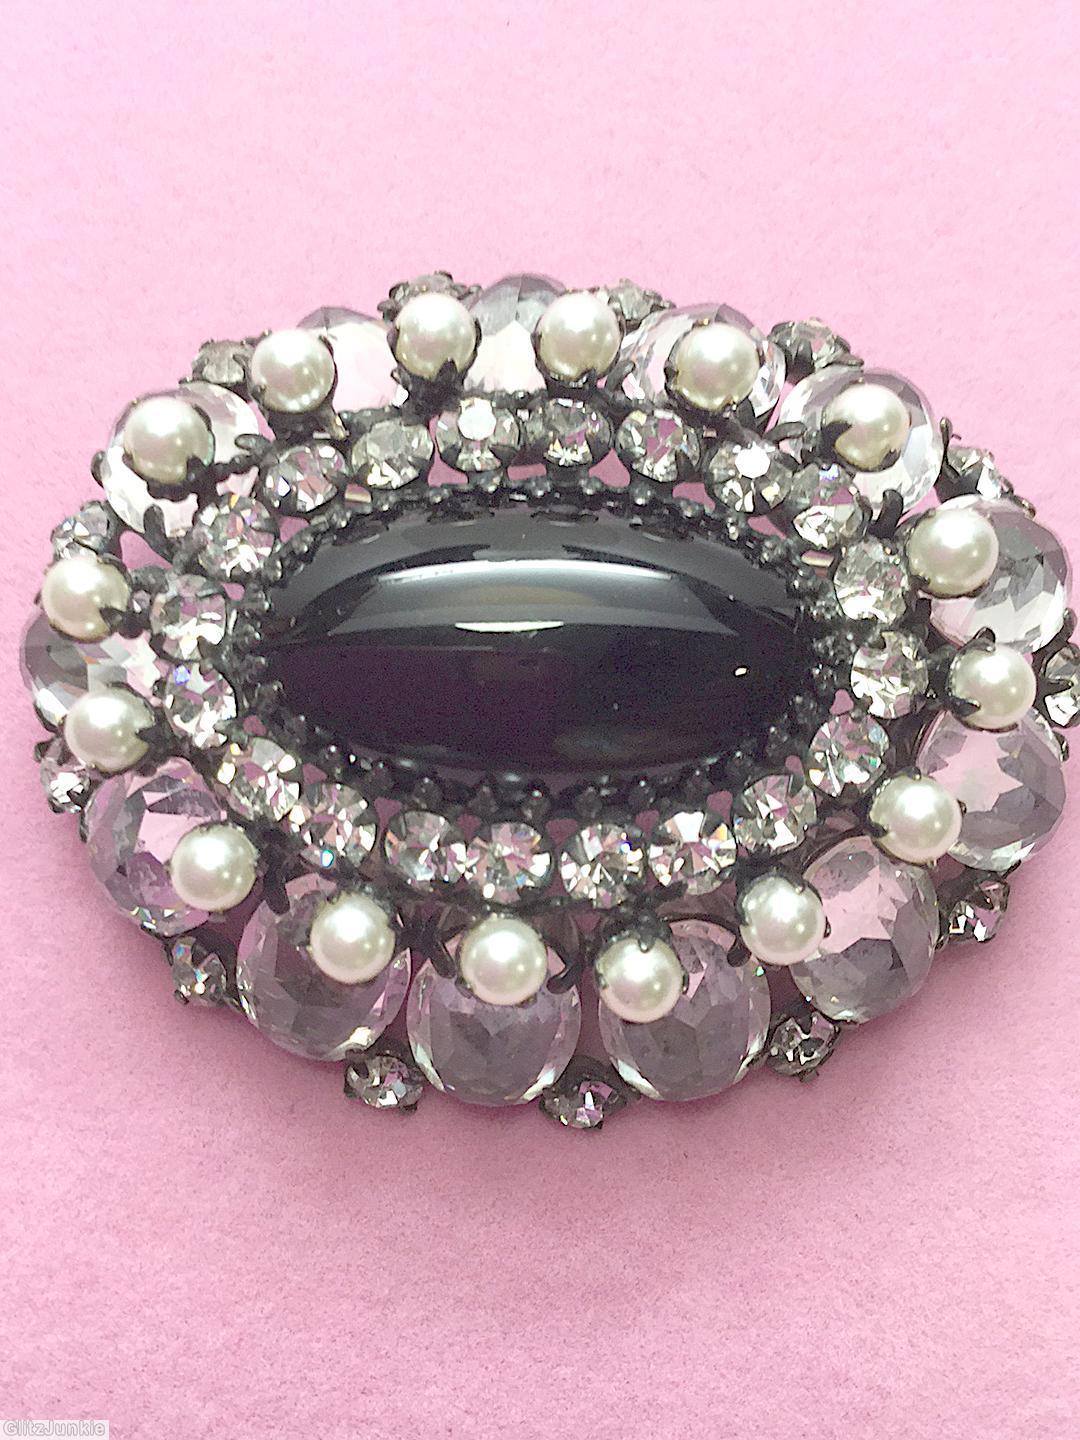 Schreiner oval domed 13 side oval stone pin large oval center 20 surrounding small stone 16 pearls crystal oval faceted stone jet large oval cab center faux pearl silvertone jewelry